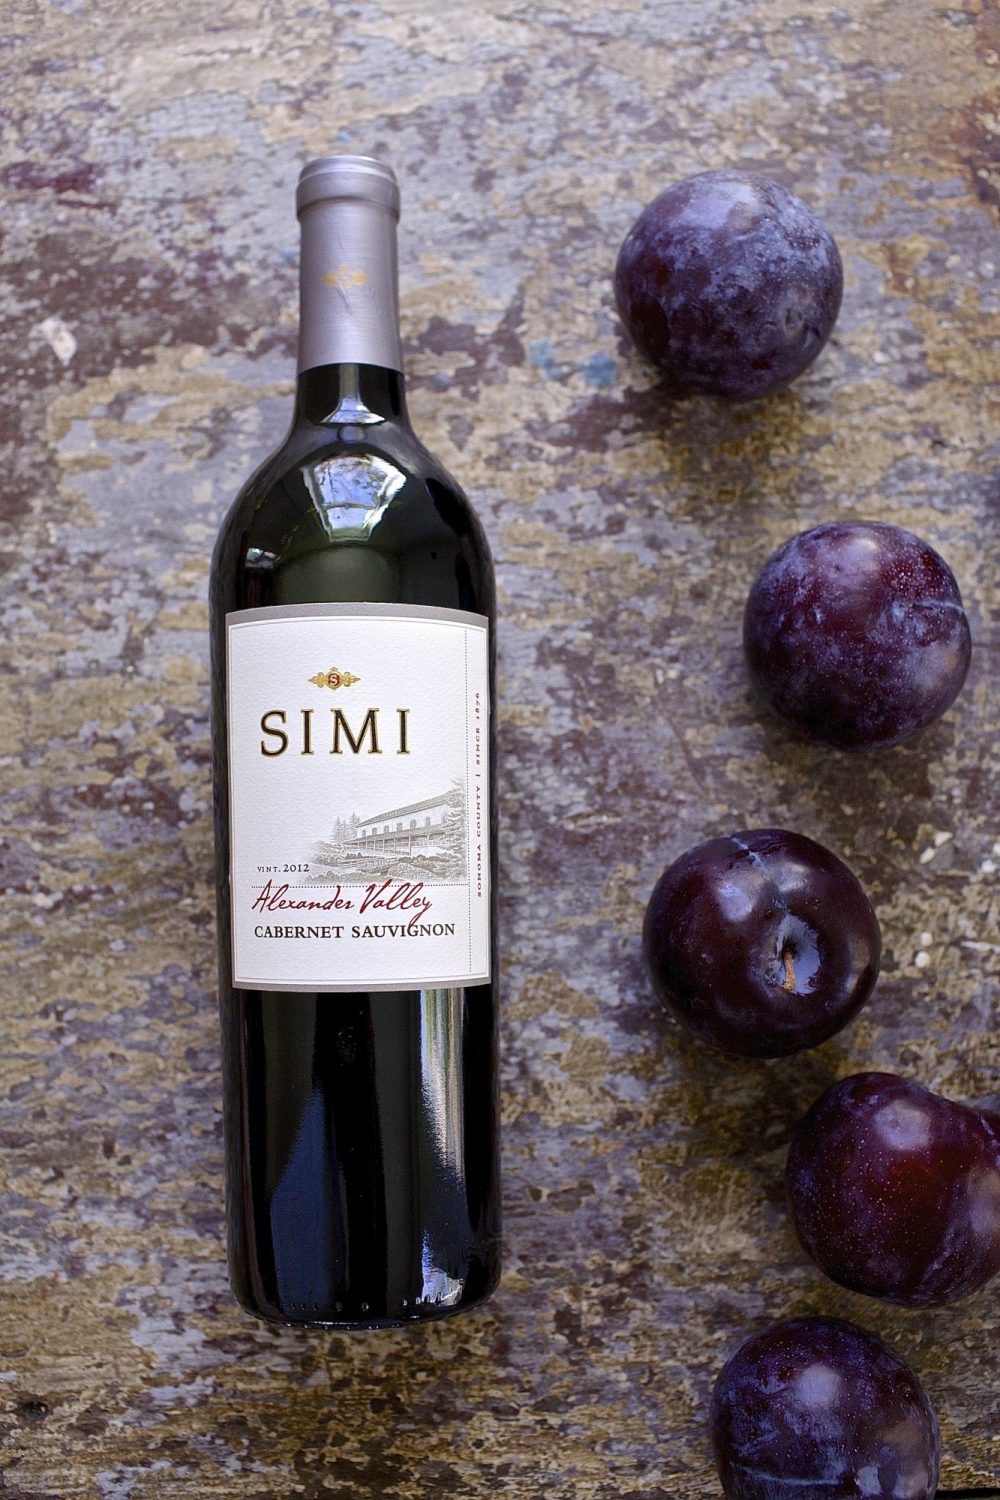 Kick off Fall with this SIMI Cabernet Sauvignon-Infused Plum Butter Recipe!